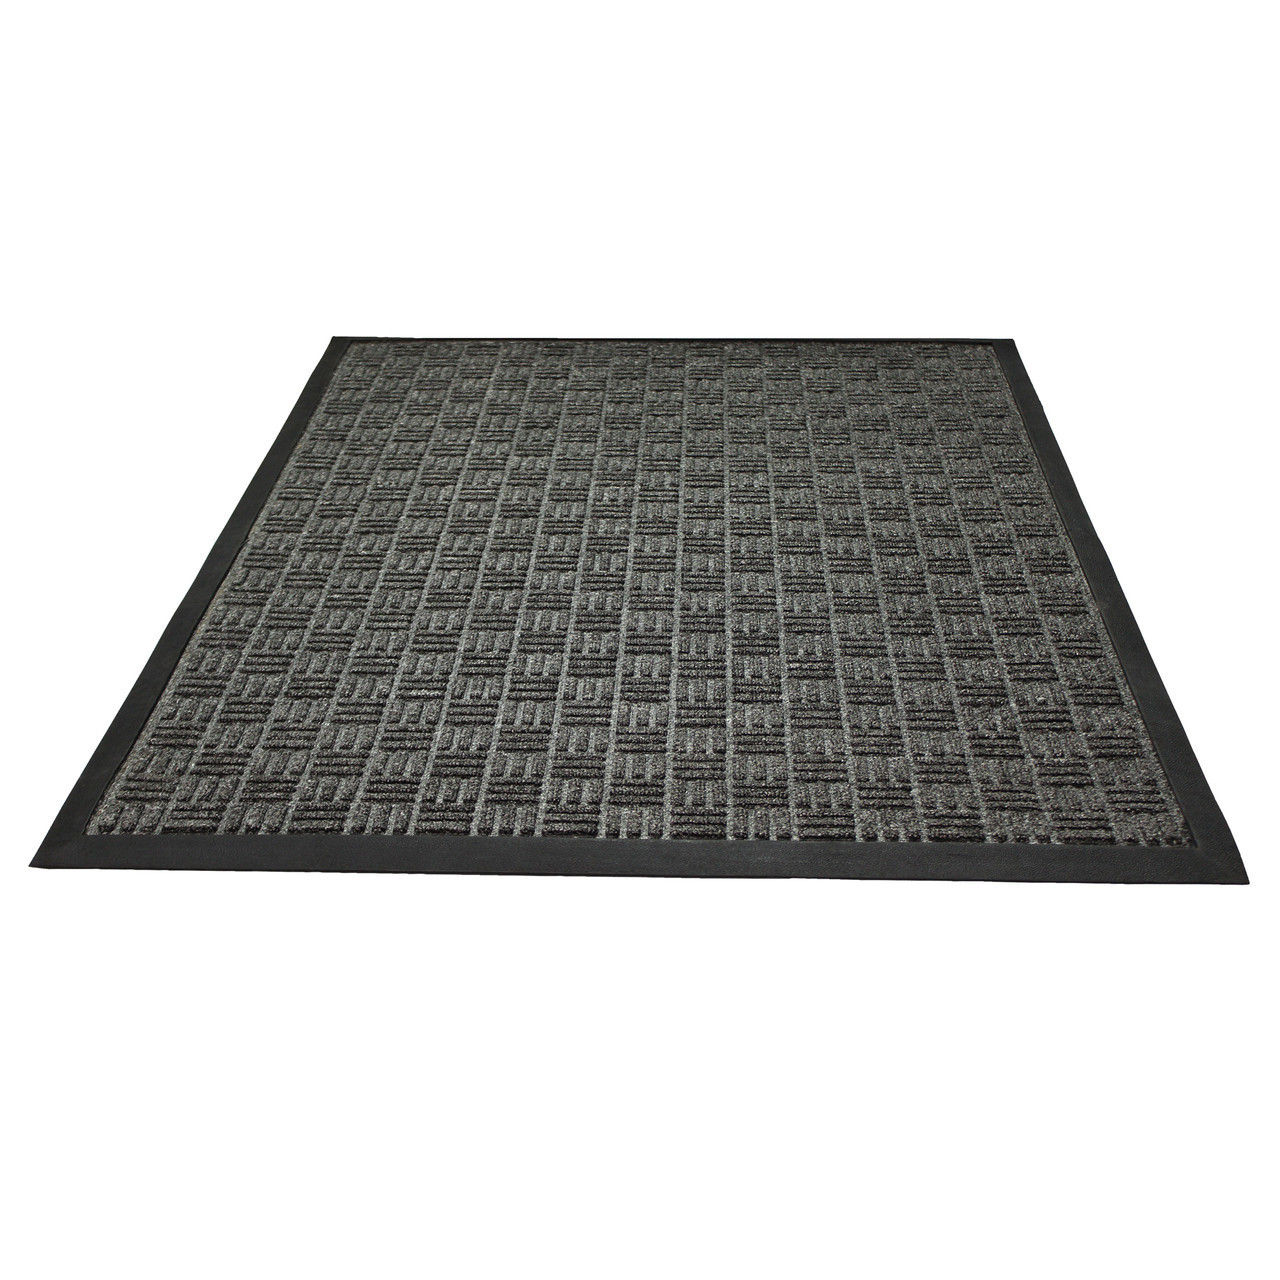 https://cdn11.bigcommerce.com/s-fjwps1jbkv/images/stencil/1280x1280/products/151/2833/ultralux-premium-indoor-outdoor-entrance-mat-or-absorbent-strong-anti-slip-entry-rug-heavy-duty-doormat-or-dark-gray__54568.1688986119.jpg?c=2?imbypass=on